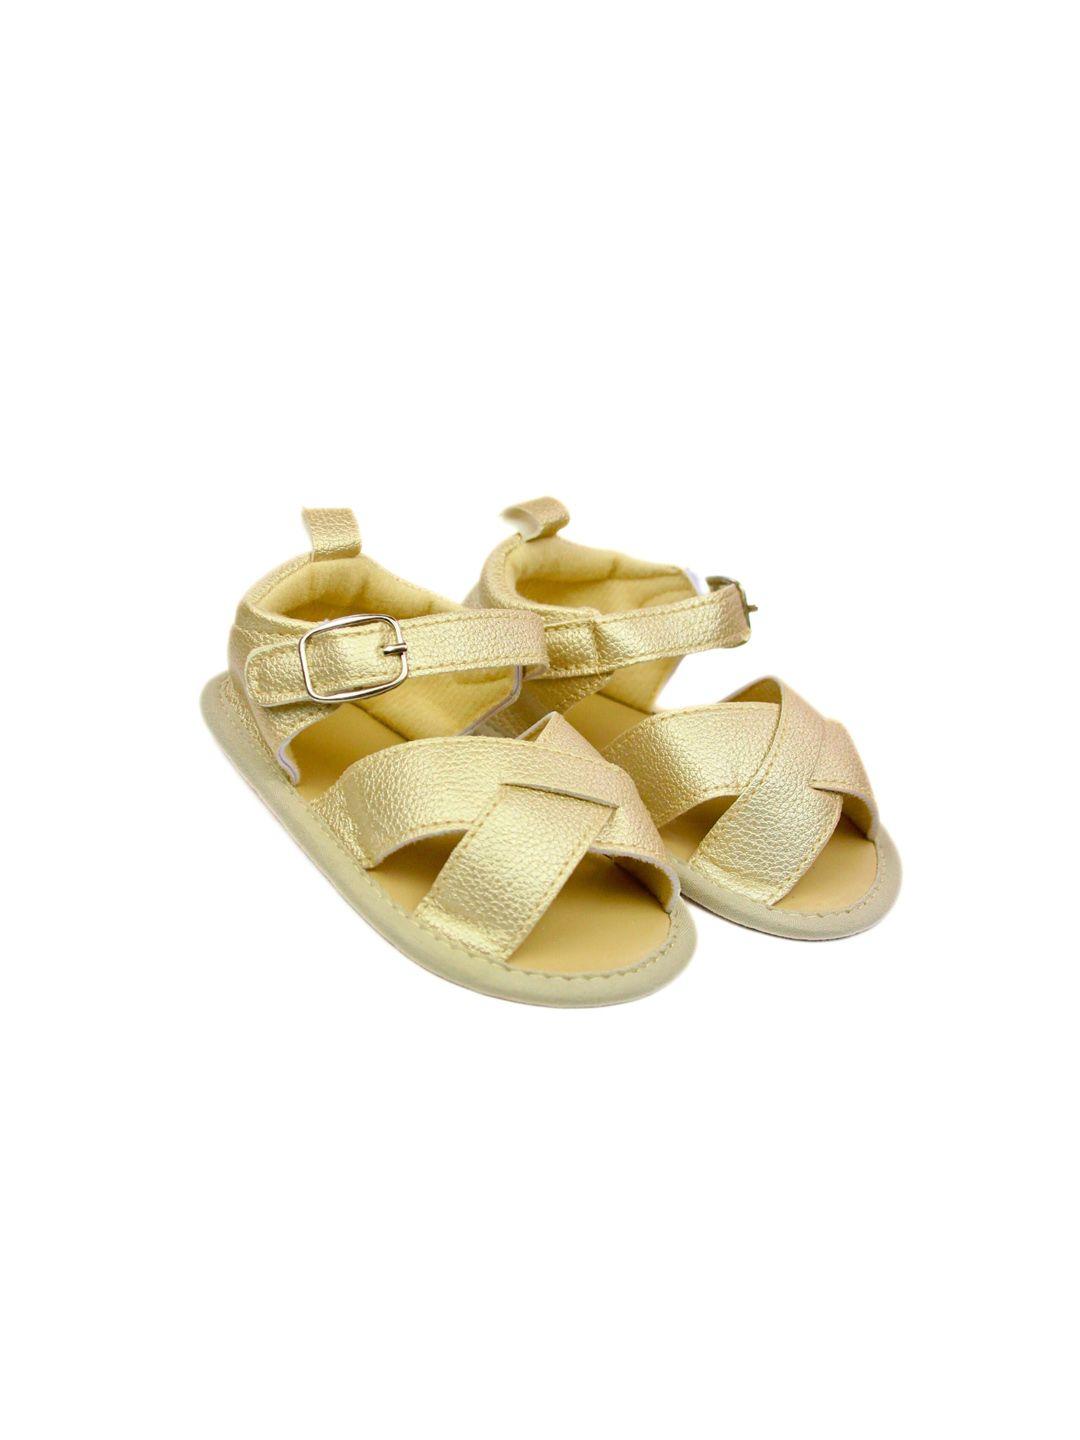 baesd infant kids open toe flats with buckles